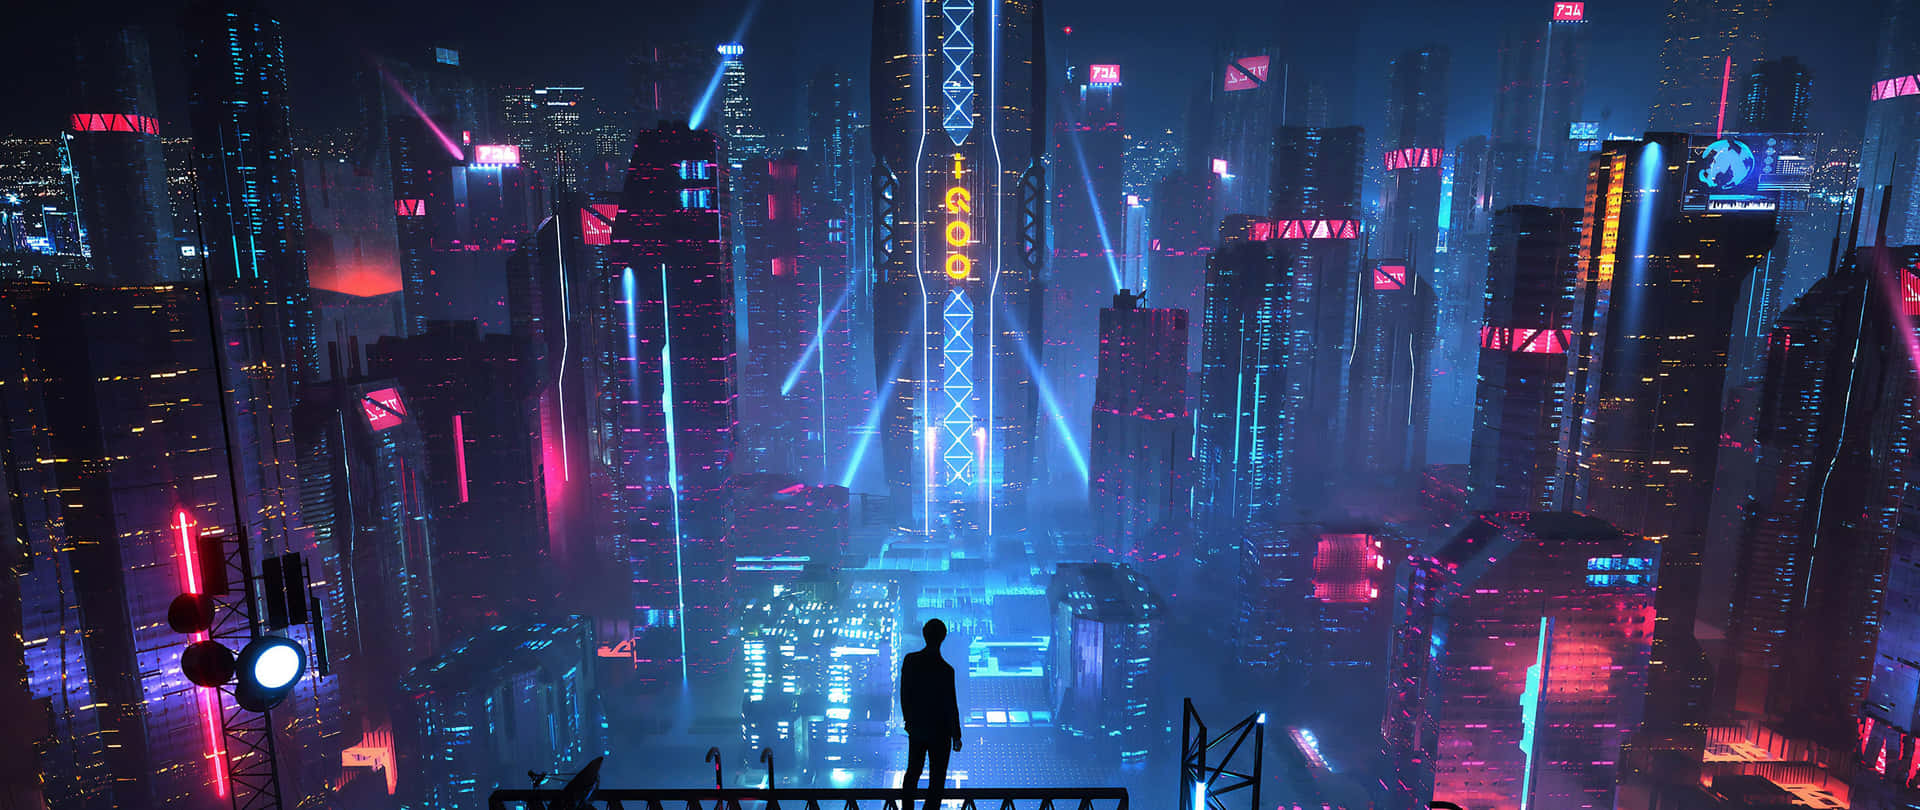 A Man Standing On A Ledge In A Futuristic City Background